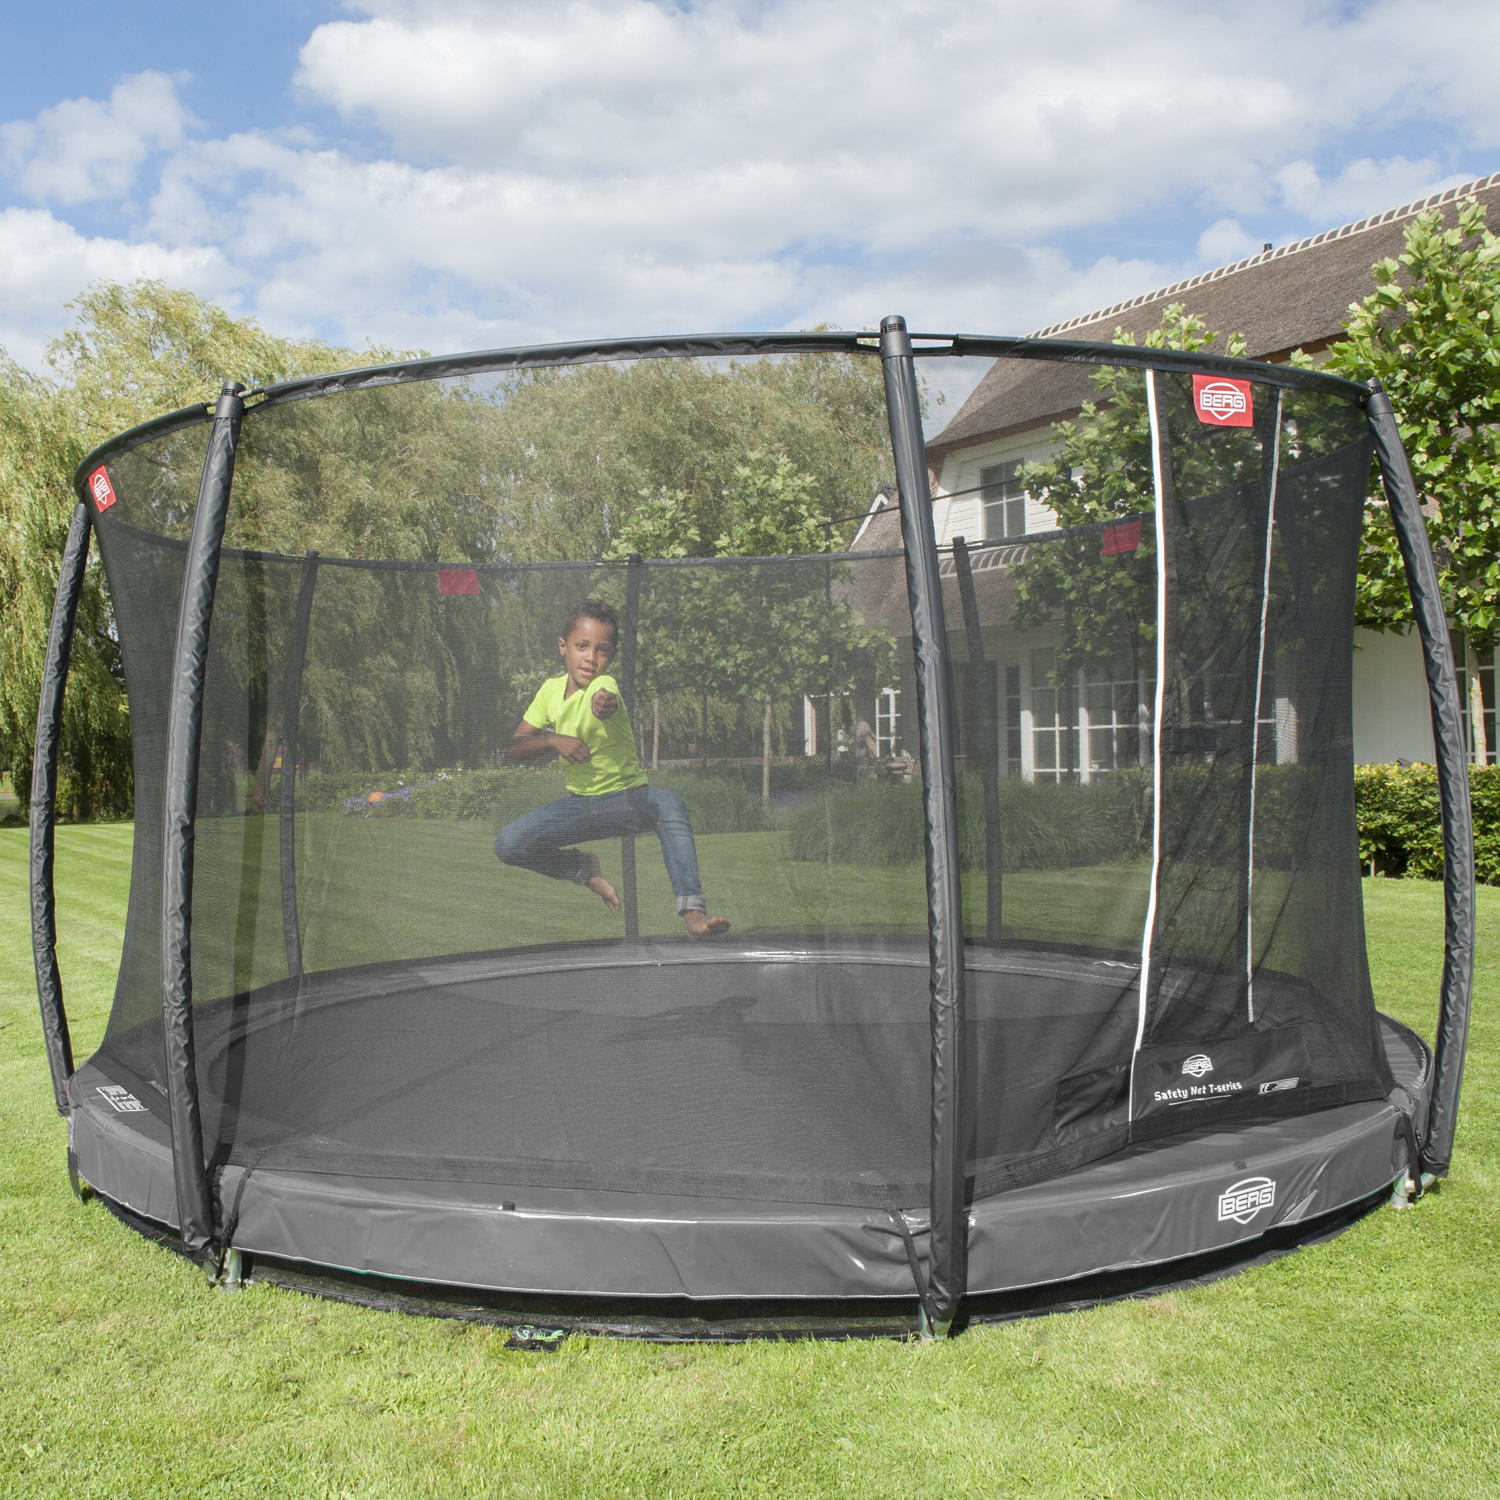 Berg InGround 430 Grey incl. Safety Net Deluxe - Best quality, biggest choice